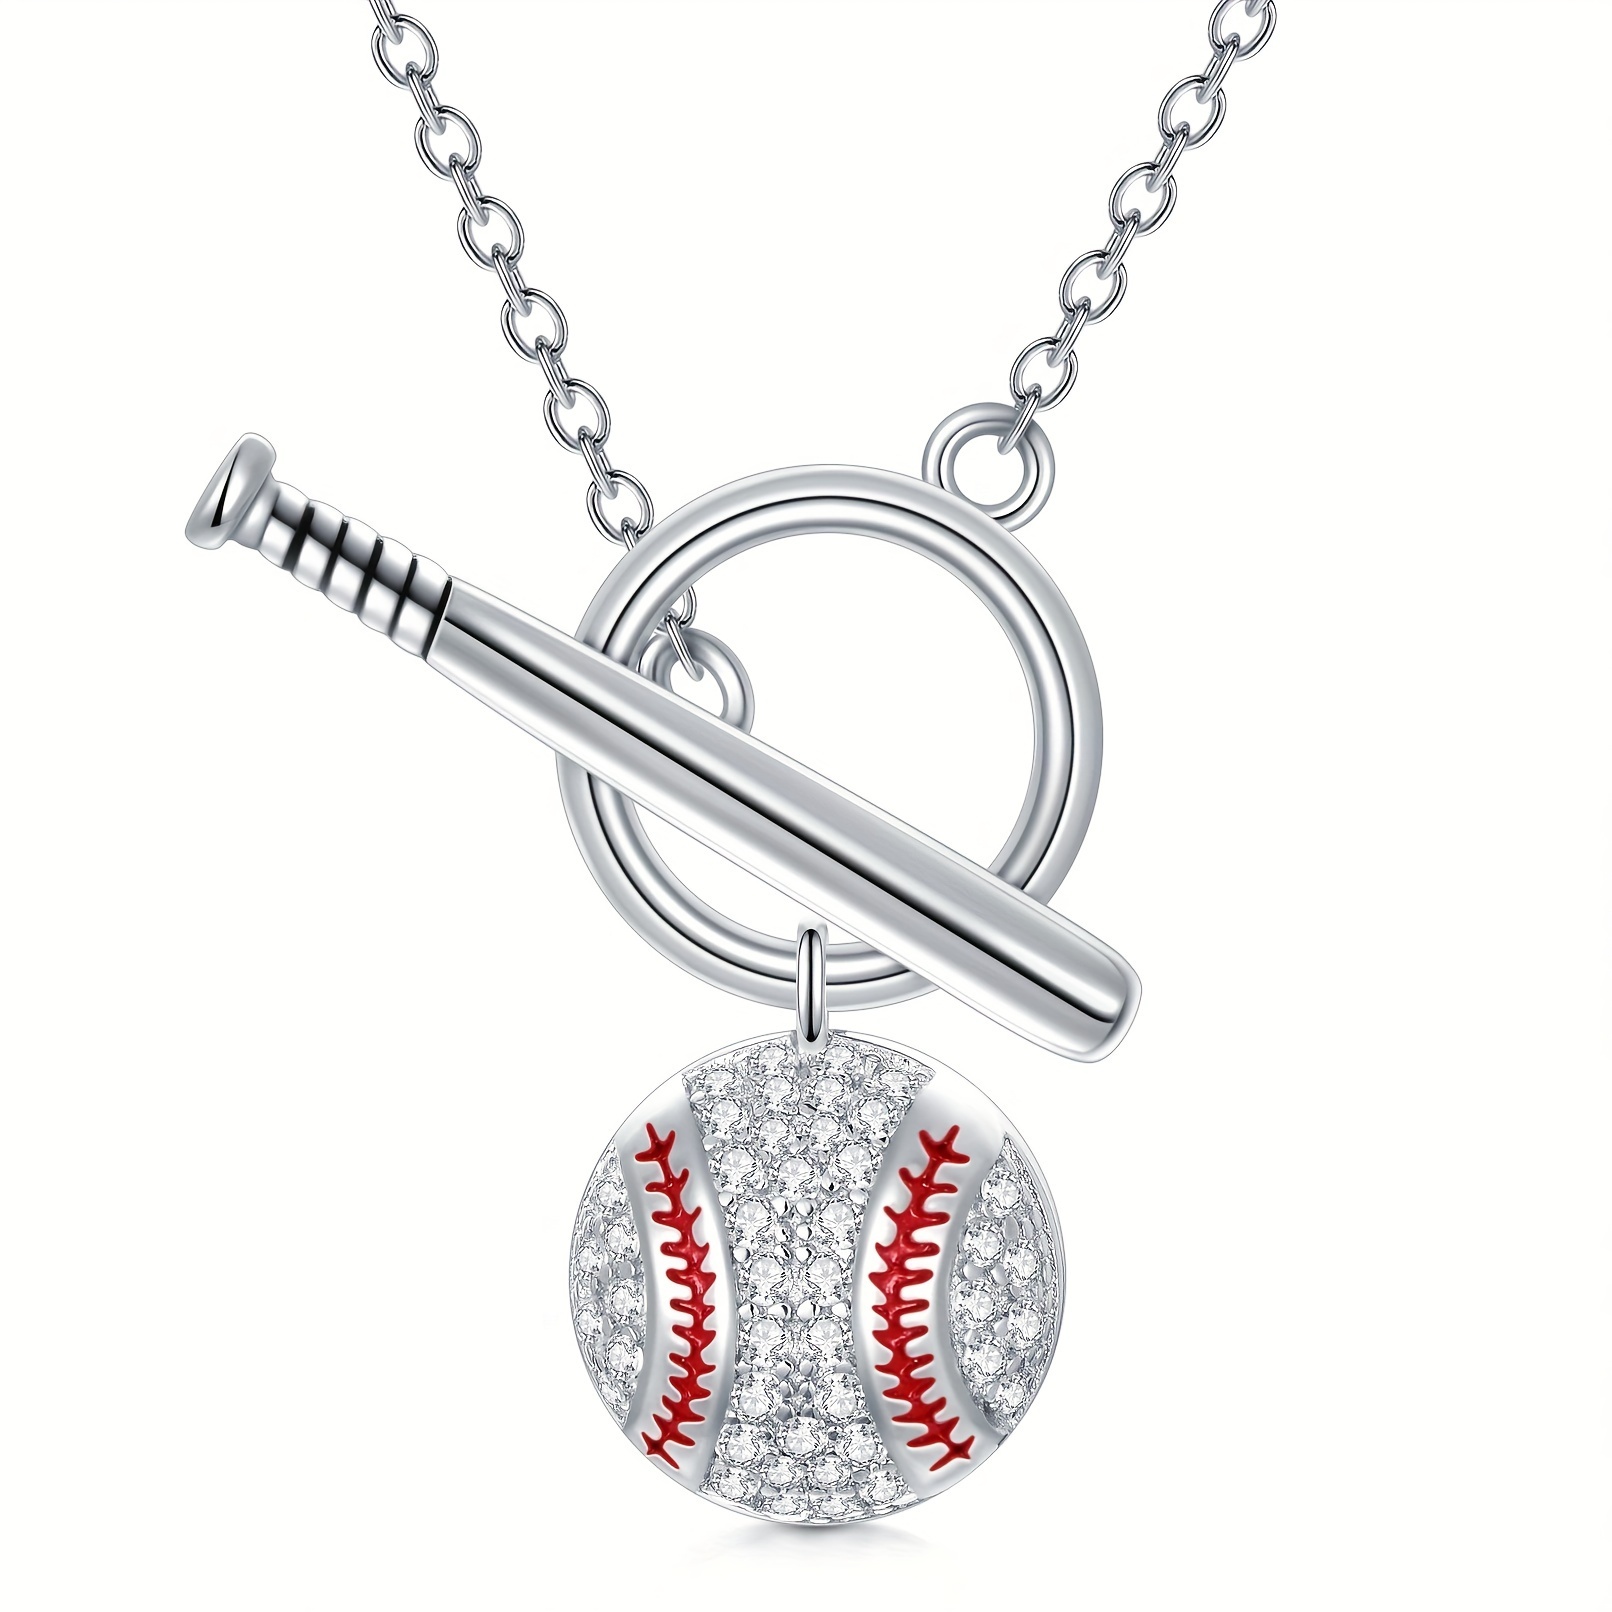 

1pc Baseball Bat Pendant Necklace With Cubic Zirconia, Sports Themed Jewelry Gifts For Women, Versatile Accessory For Daily Wear, Parties, Gifting, Unisex Design